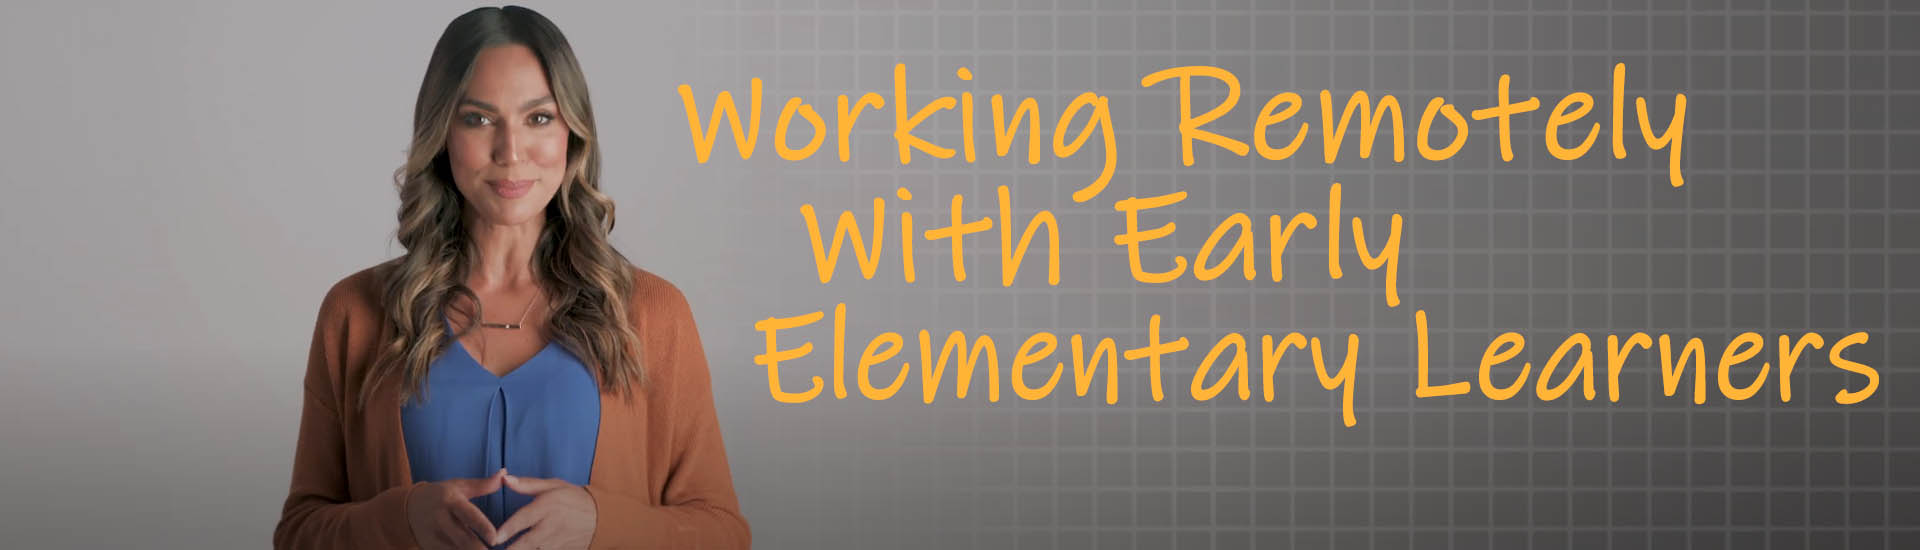 Working Remotely With Early Elementary Learners